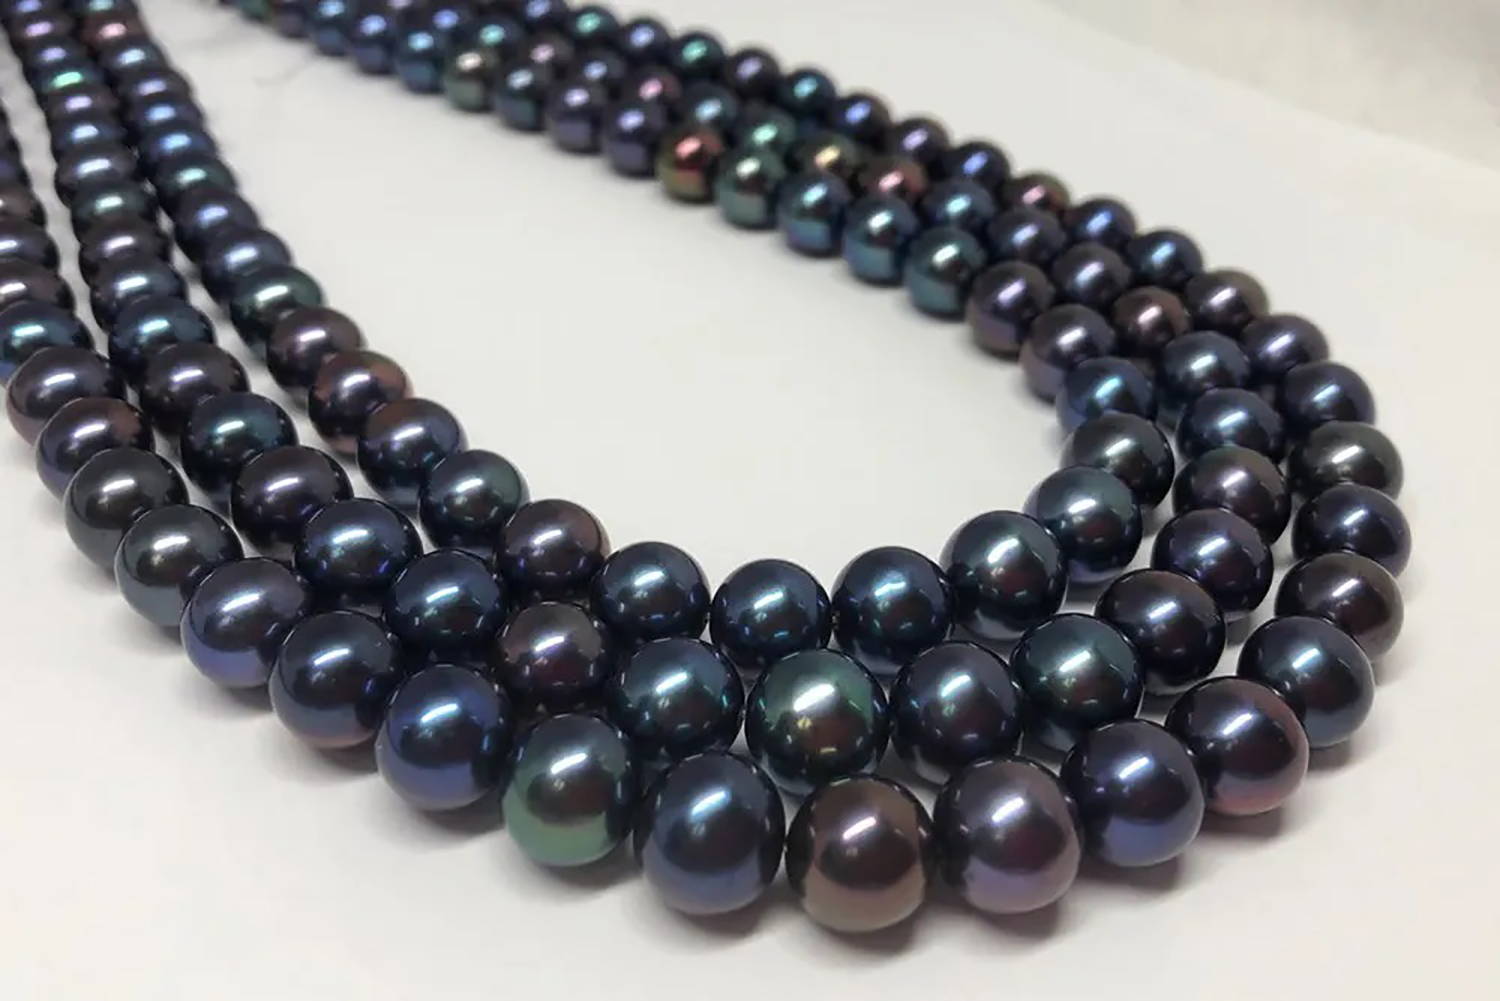 Dyed Black Freshwater Pearls